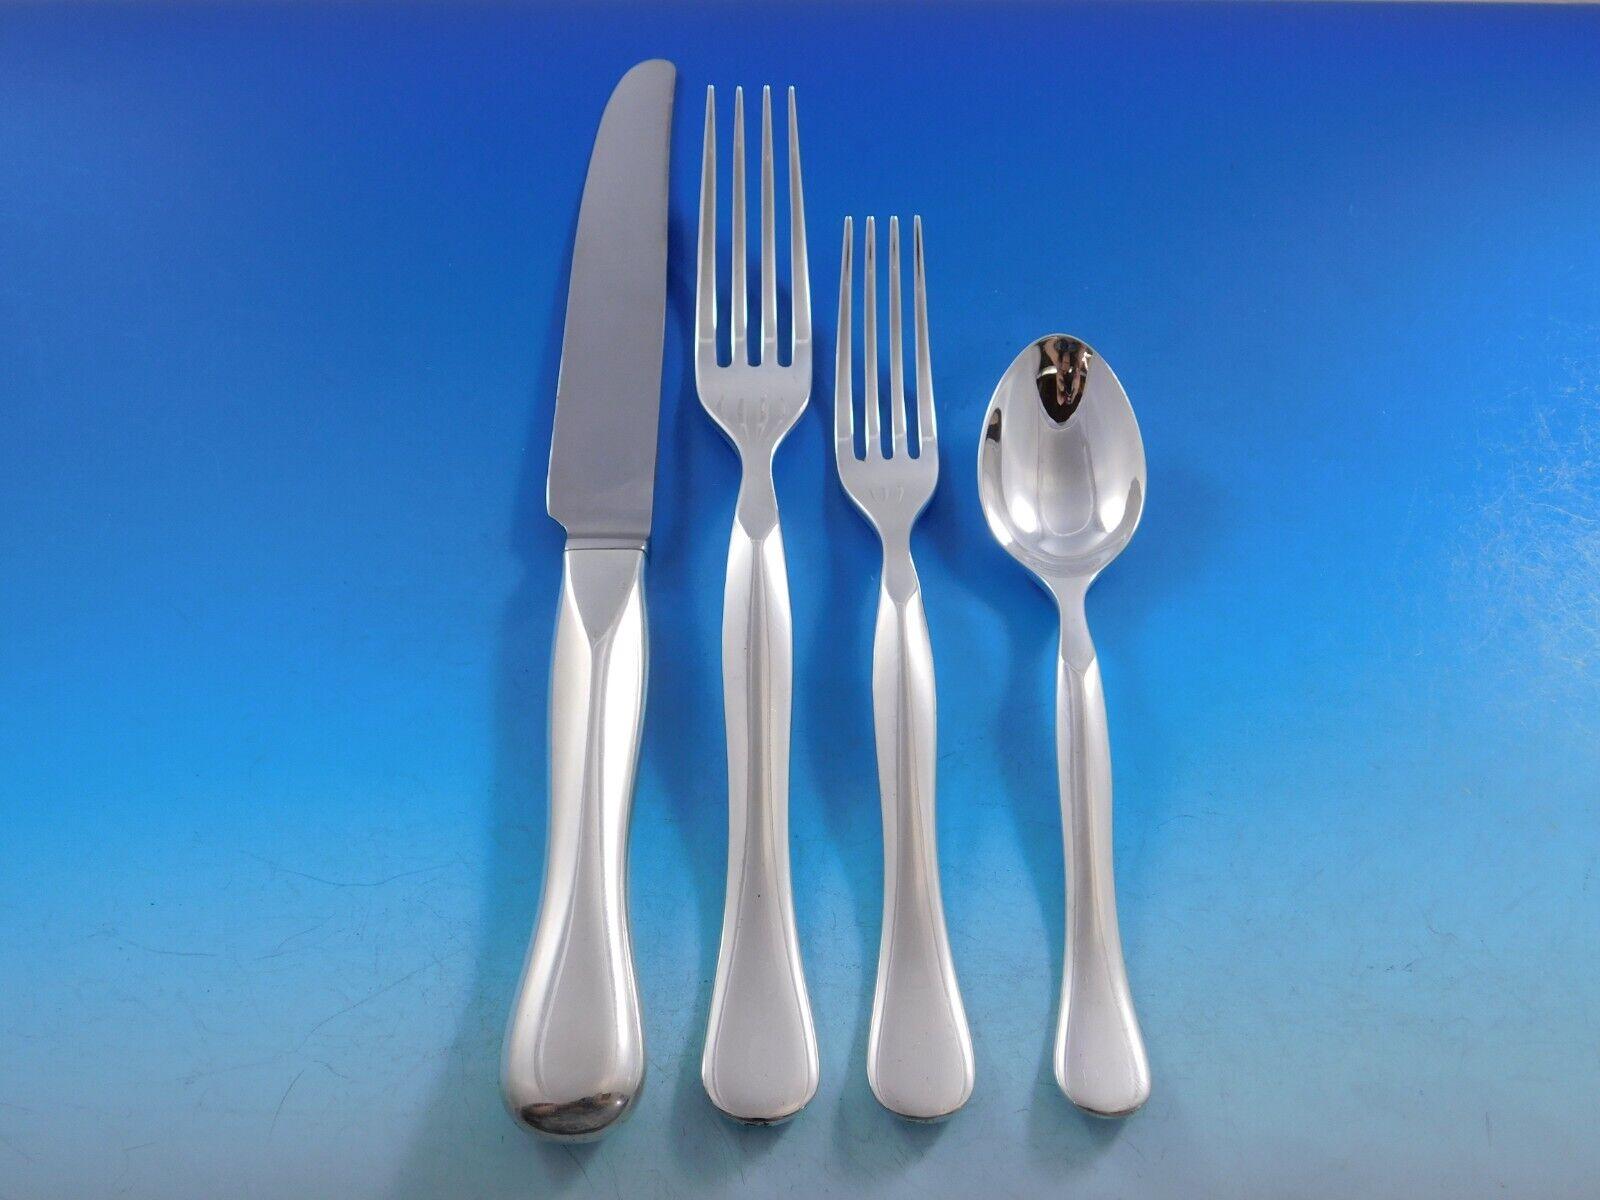 Scarce Eccentrica by Rosenthal Bulgari modern sterling silver flatware set, 54 pieces. The pieces are large and massively heavy. This set includes:

8 Dinner Knives, 9 7/8